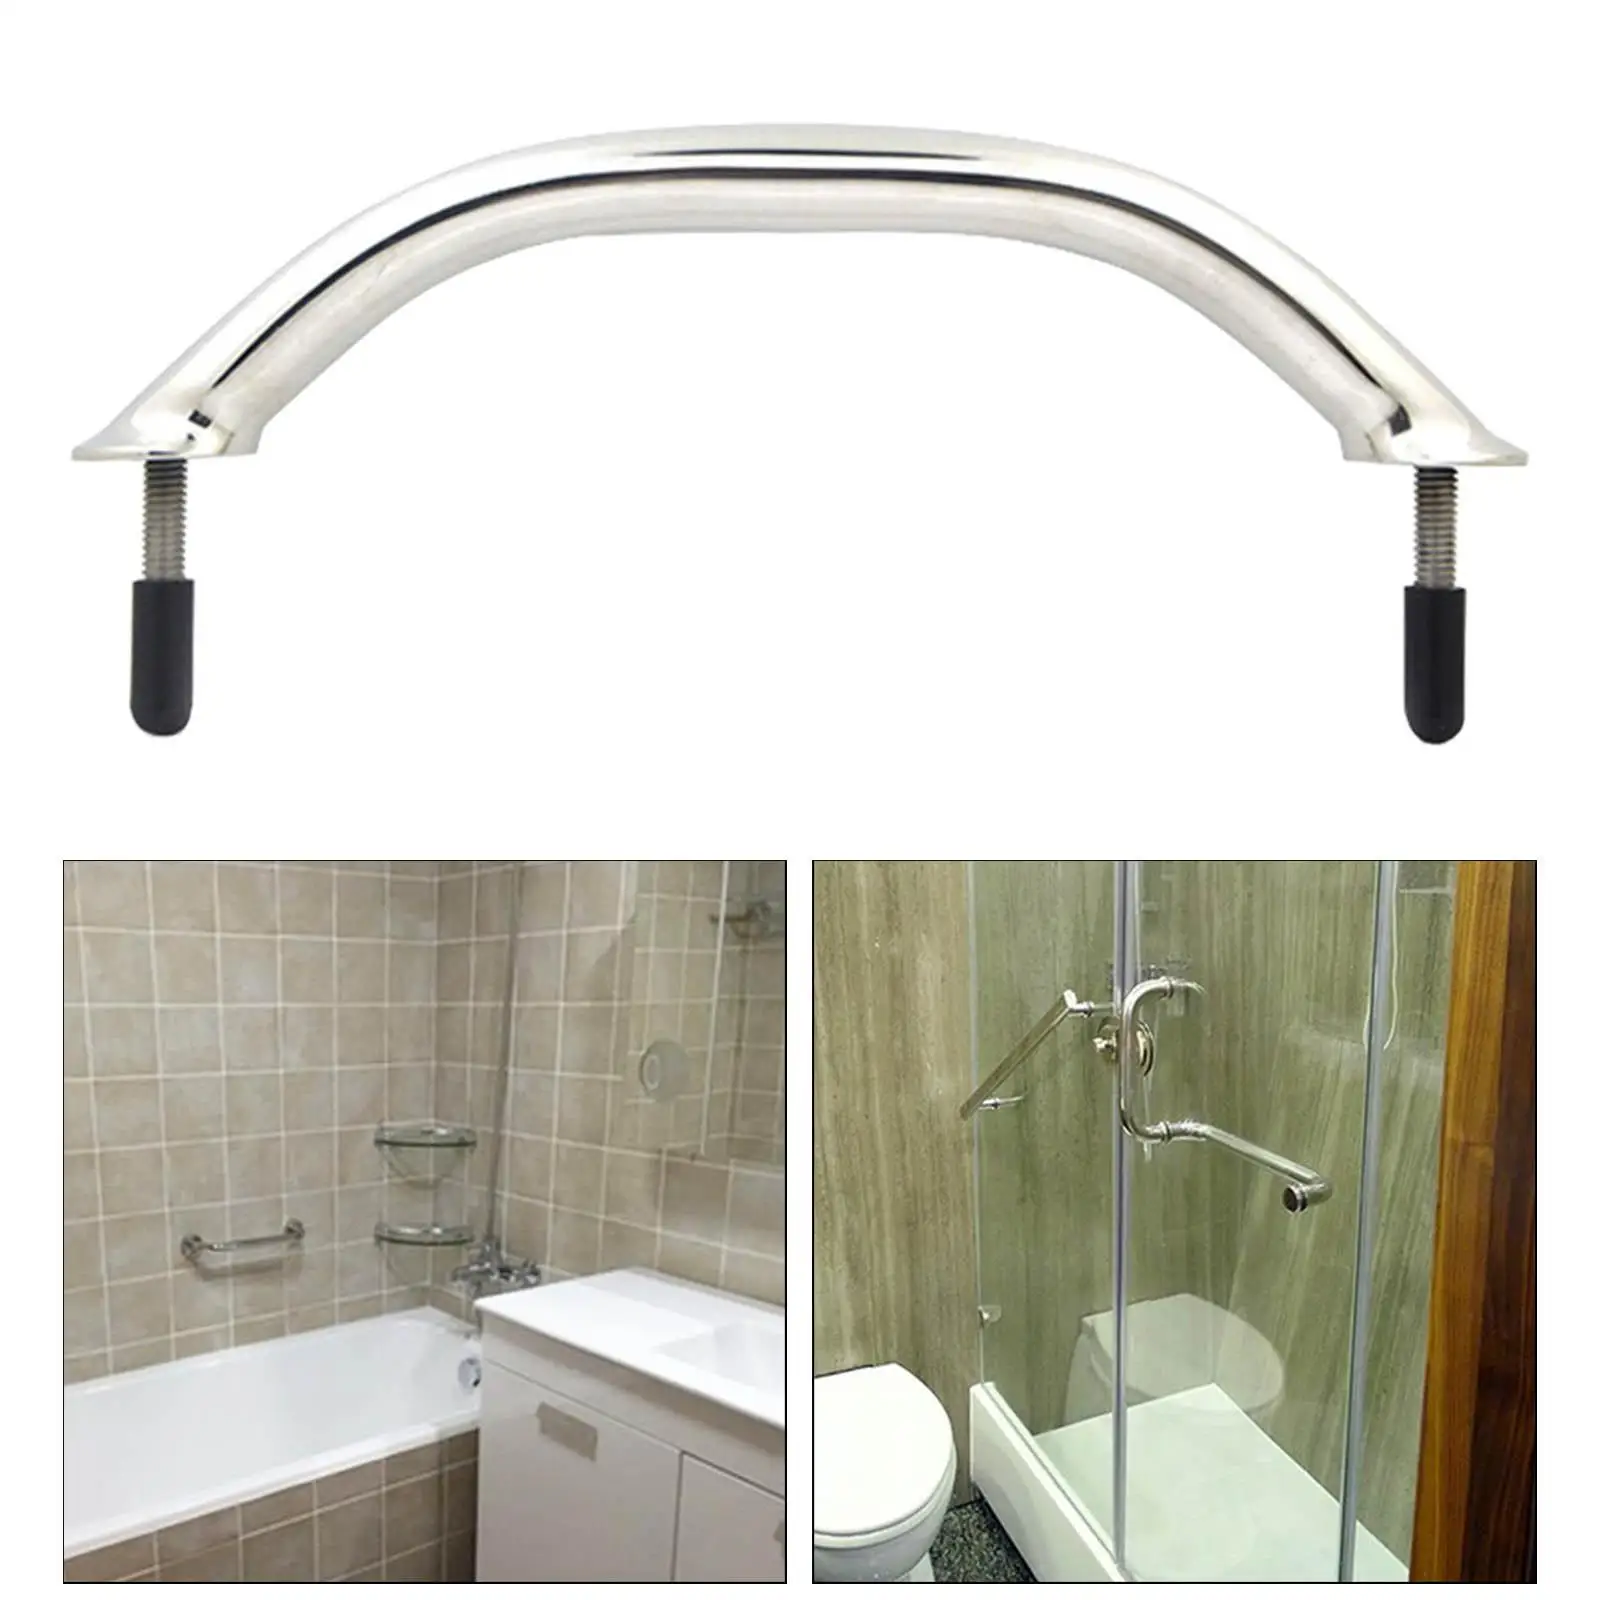 316 Stainless Steel Handrail Grab Handle 24inch Boat Accessories Balance Assist Wall Mounted Towels Rail for Ship Marine RV